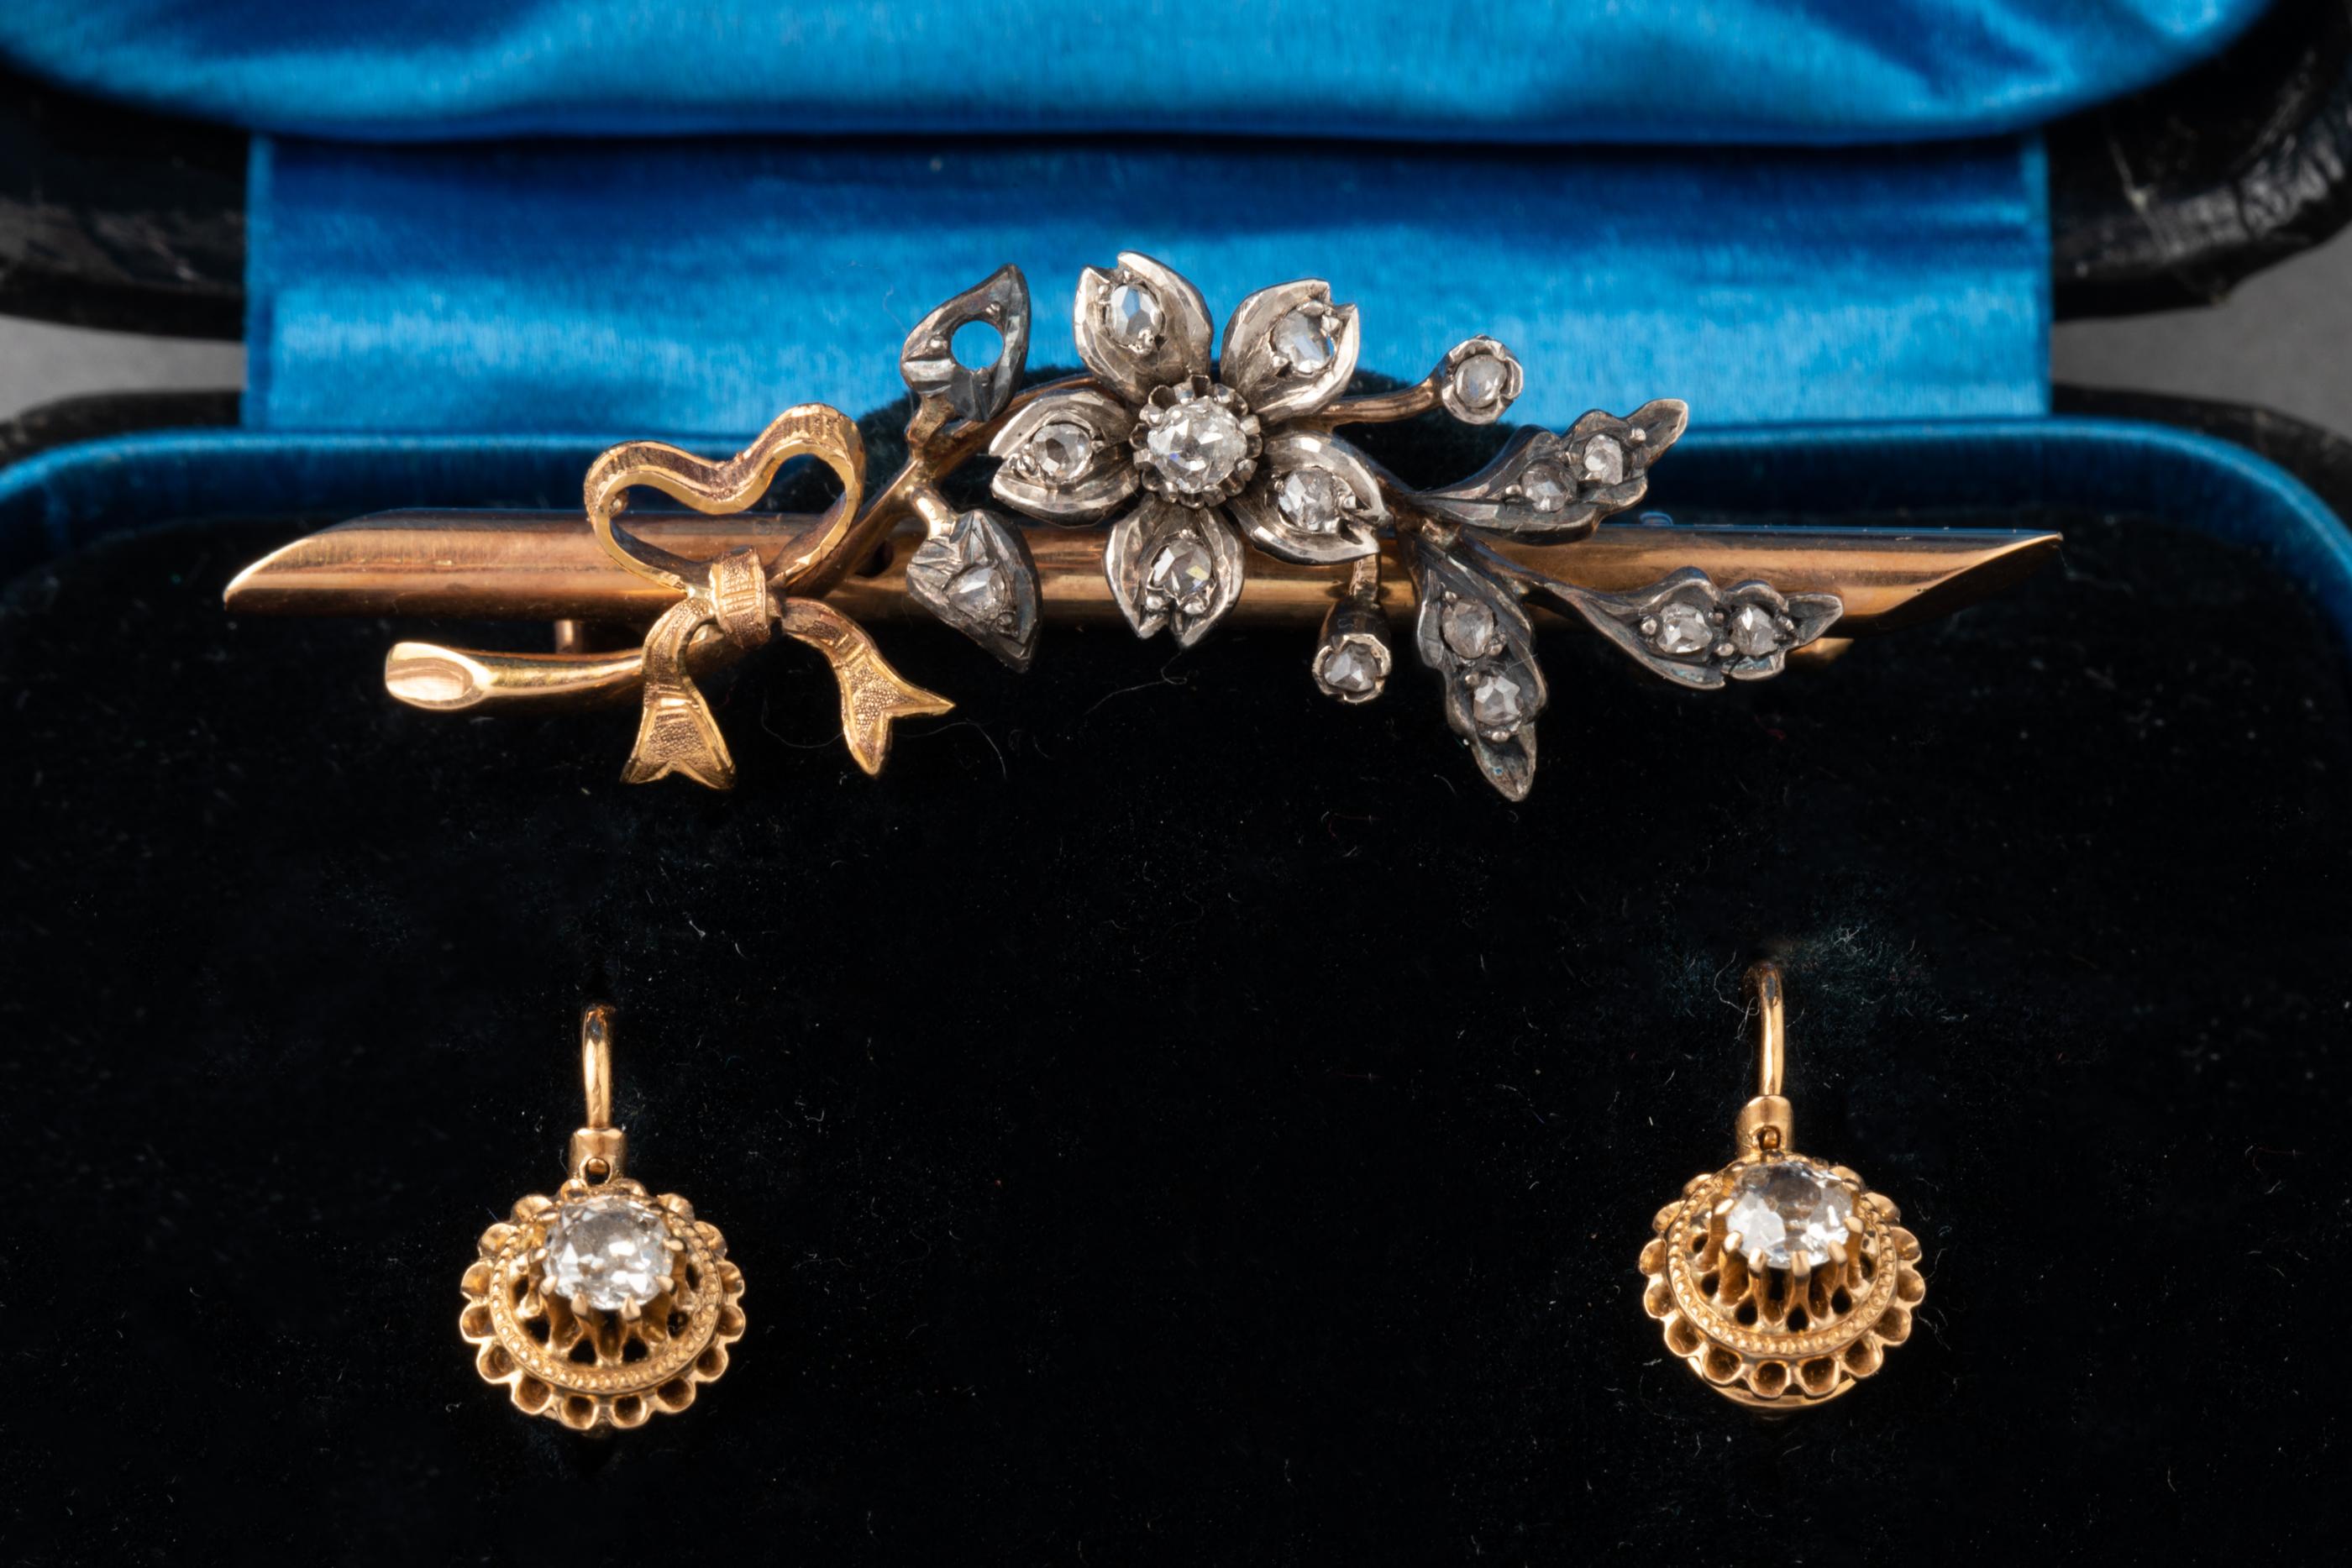 Antique Gold Silver and Diamonds Earrings and Brooch

Beautiful set in original boxe, made in France circa 1870.
The brooch measures 5 cm, the earrings 1.5 cm.
Made in yellow and rose gold 18k, silver and diamonds. The diamonds are old european cut